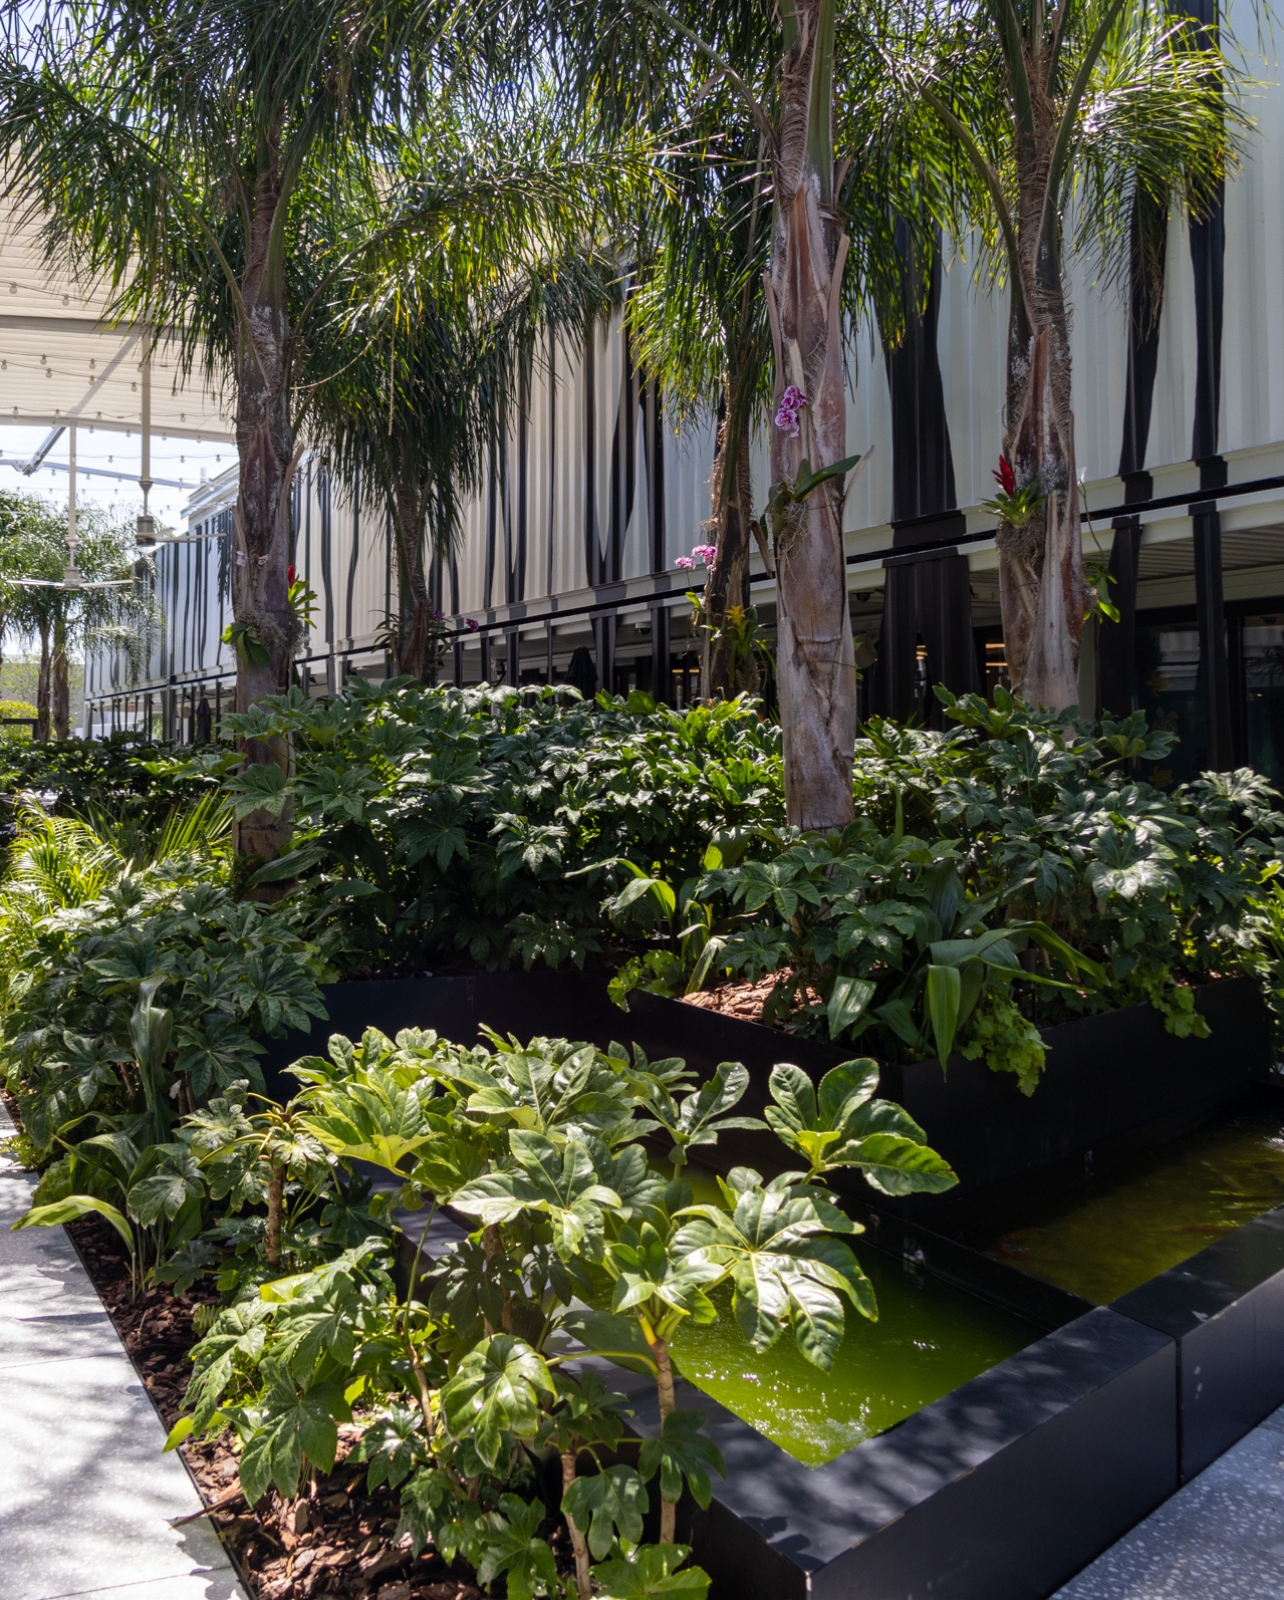 Outdoor Greenery with Koi Pond at the Bal Harbour Shops Access Pop-up